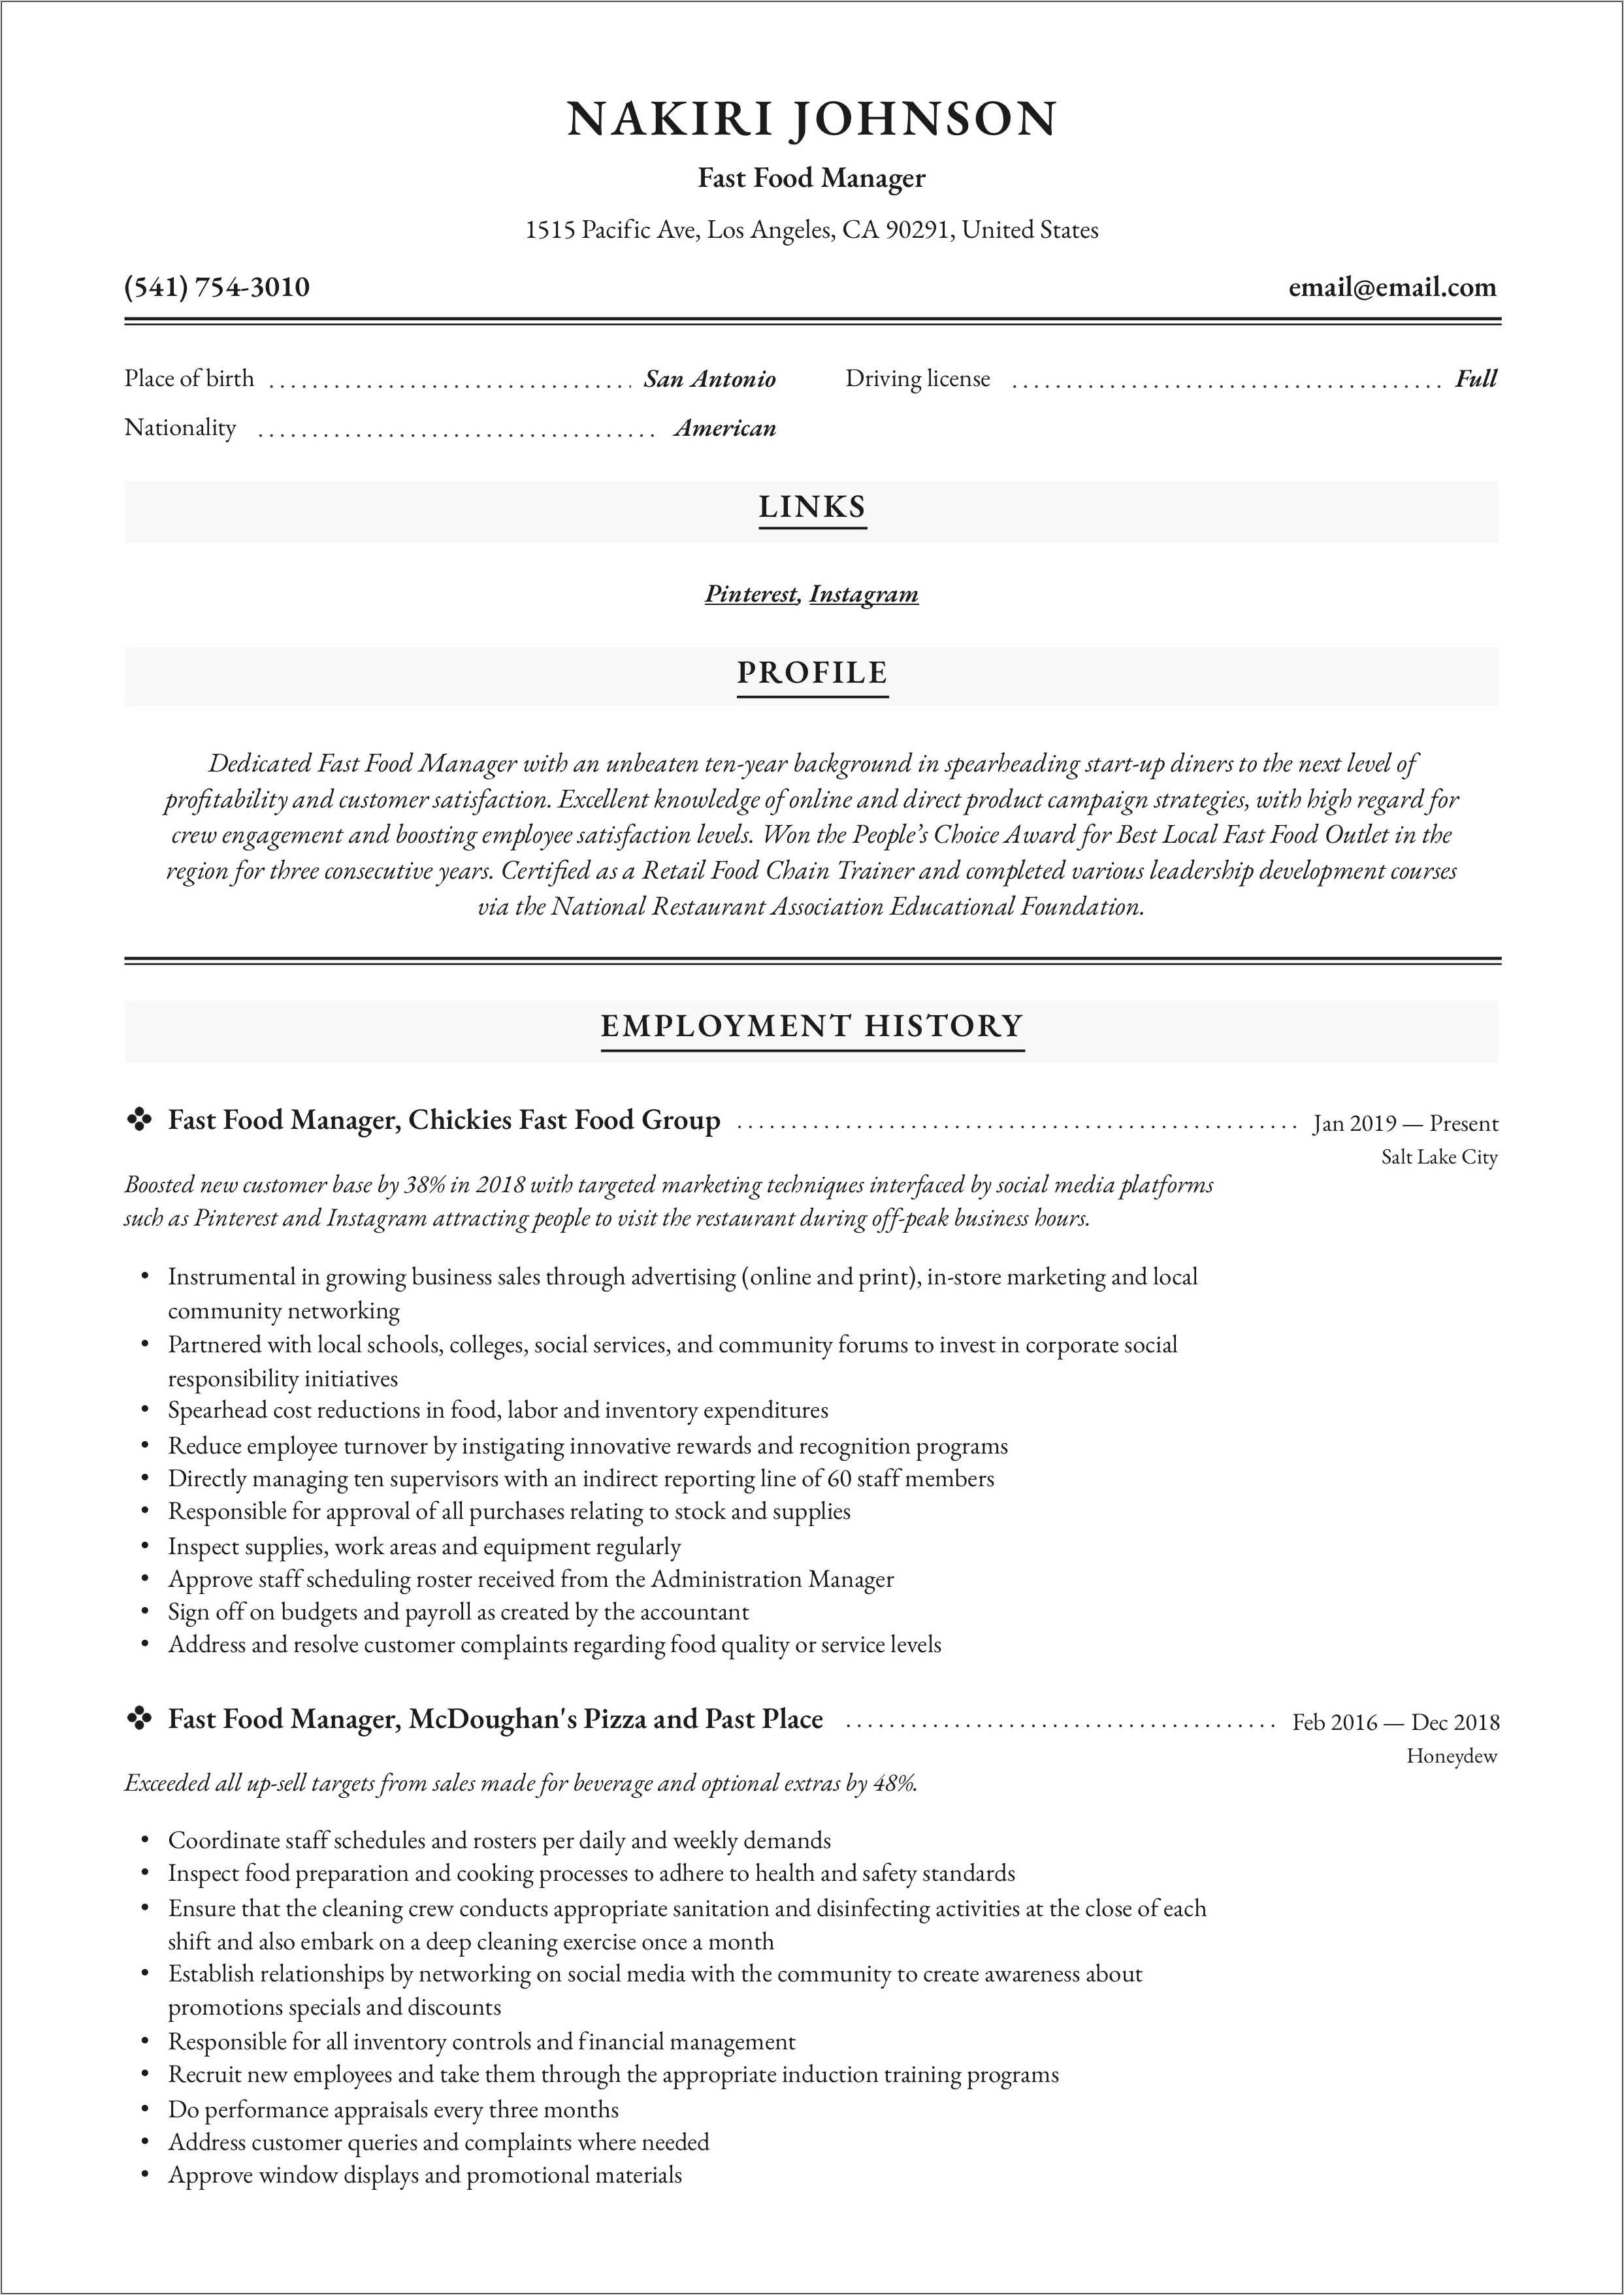 Resume Summary Examples For Fast Food - Resume Example Gallery